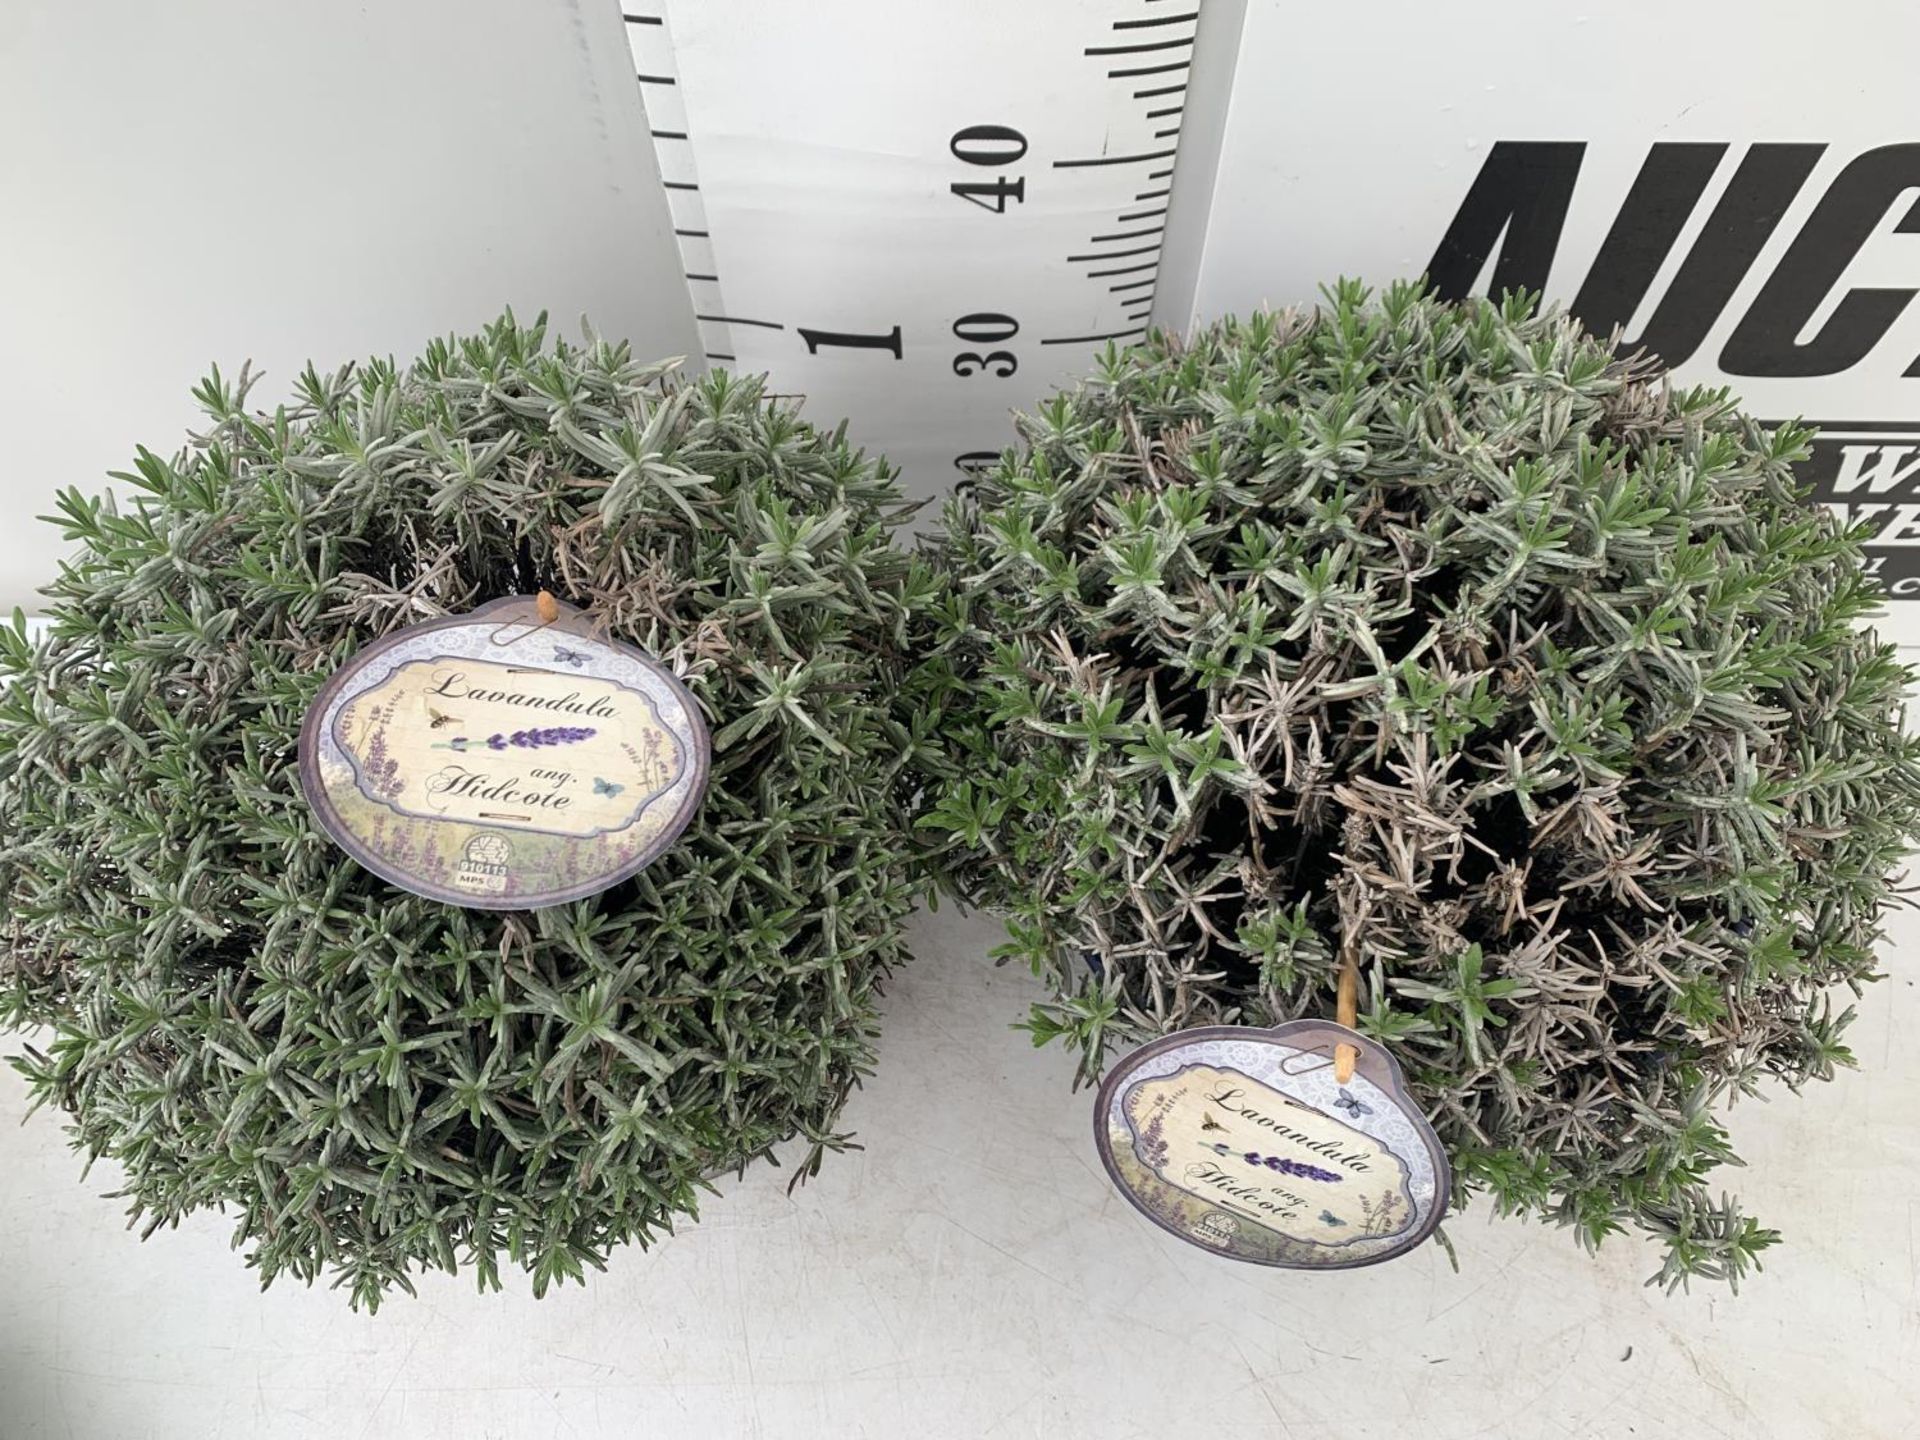 TWO LAVENDER 'HIDCOTE' IN 5 LTR POTS APPROX 40CM IN HEIGHT IN 5 LTR POTS TO BE SOLD FOR THE TWO - Image 4 of 8